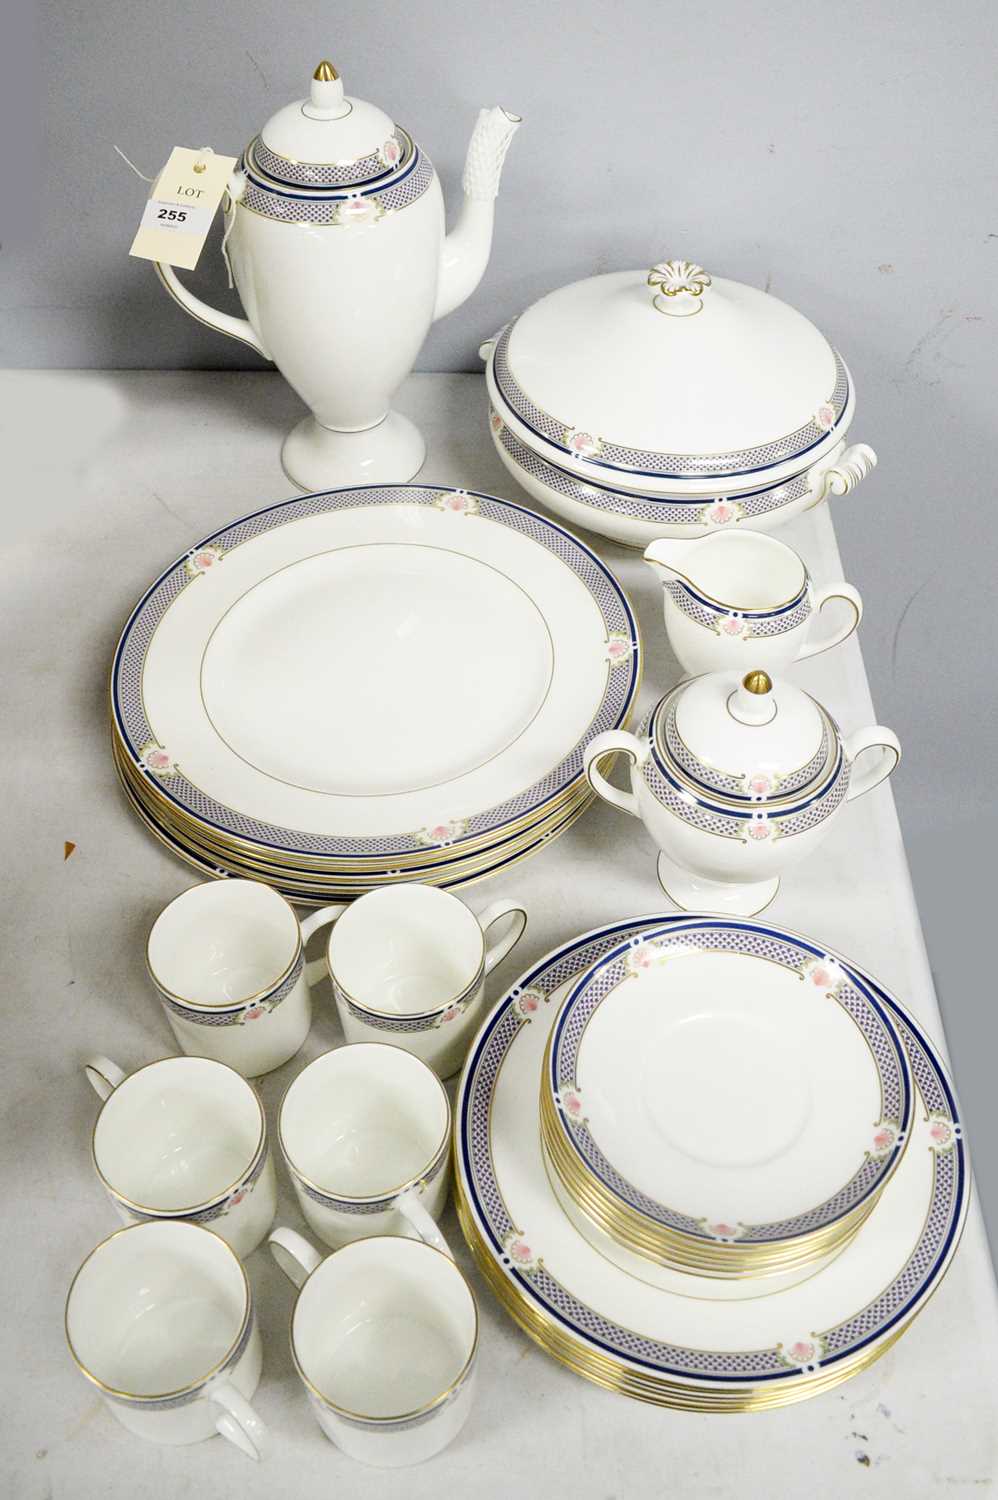 A Wedgwood 'Waverley' pattern dinner and tea service.